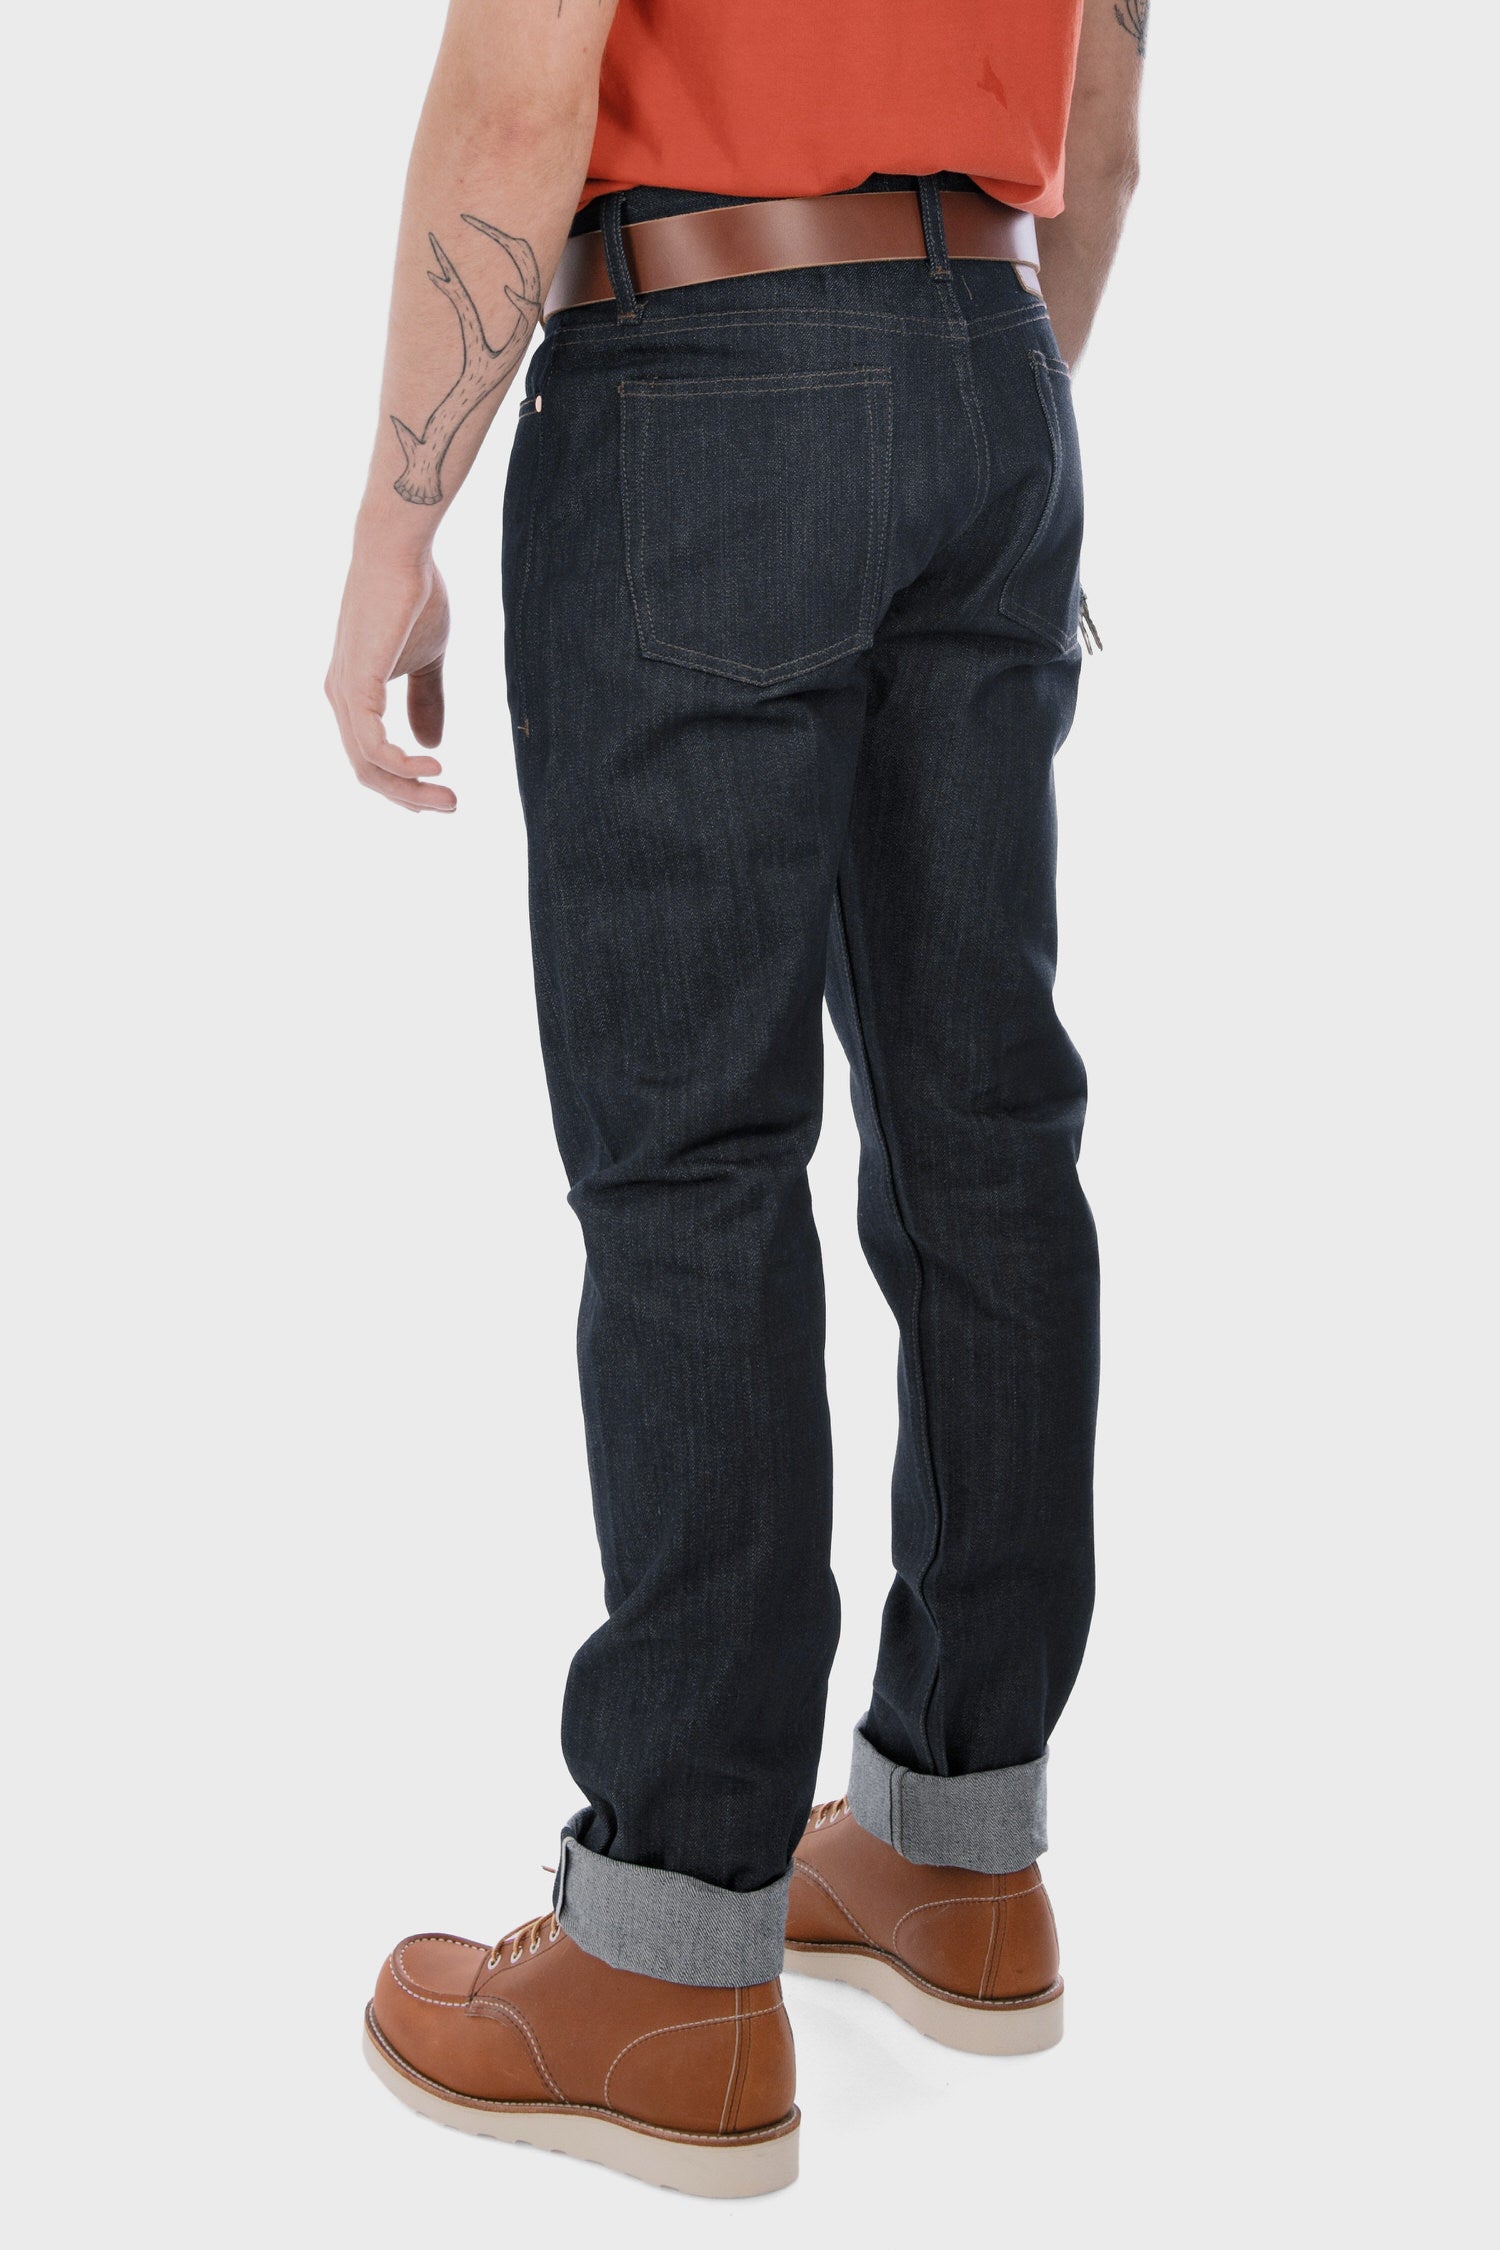 Unbranded Tapered Fit in Indigo